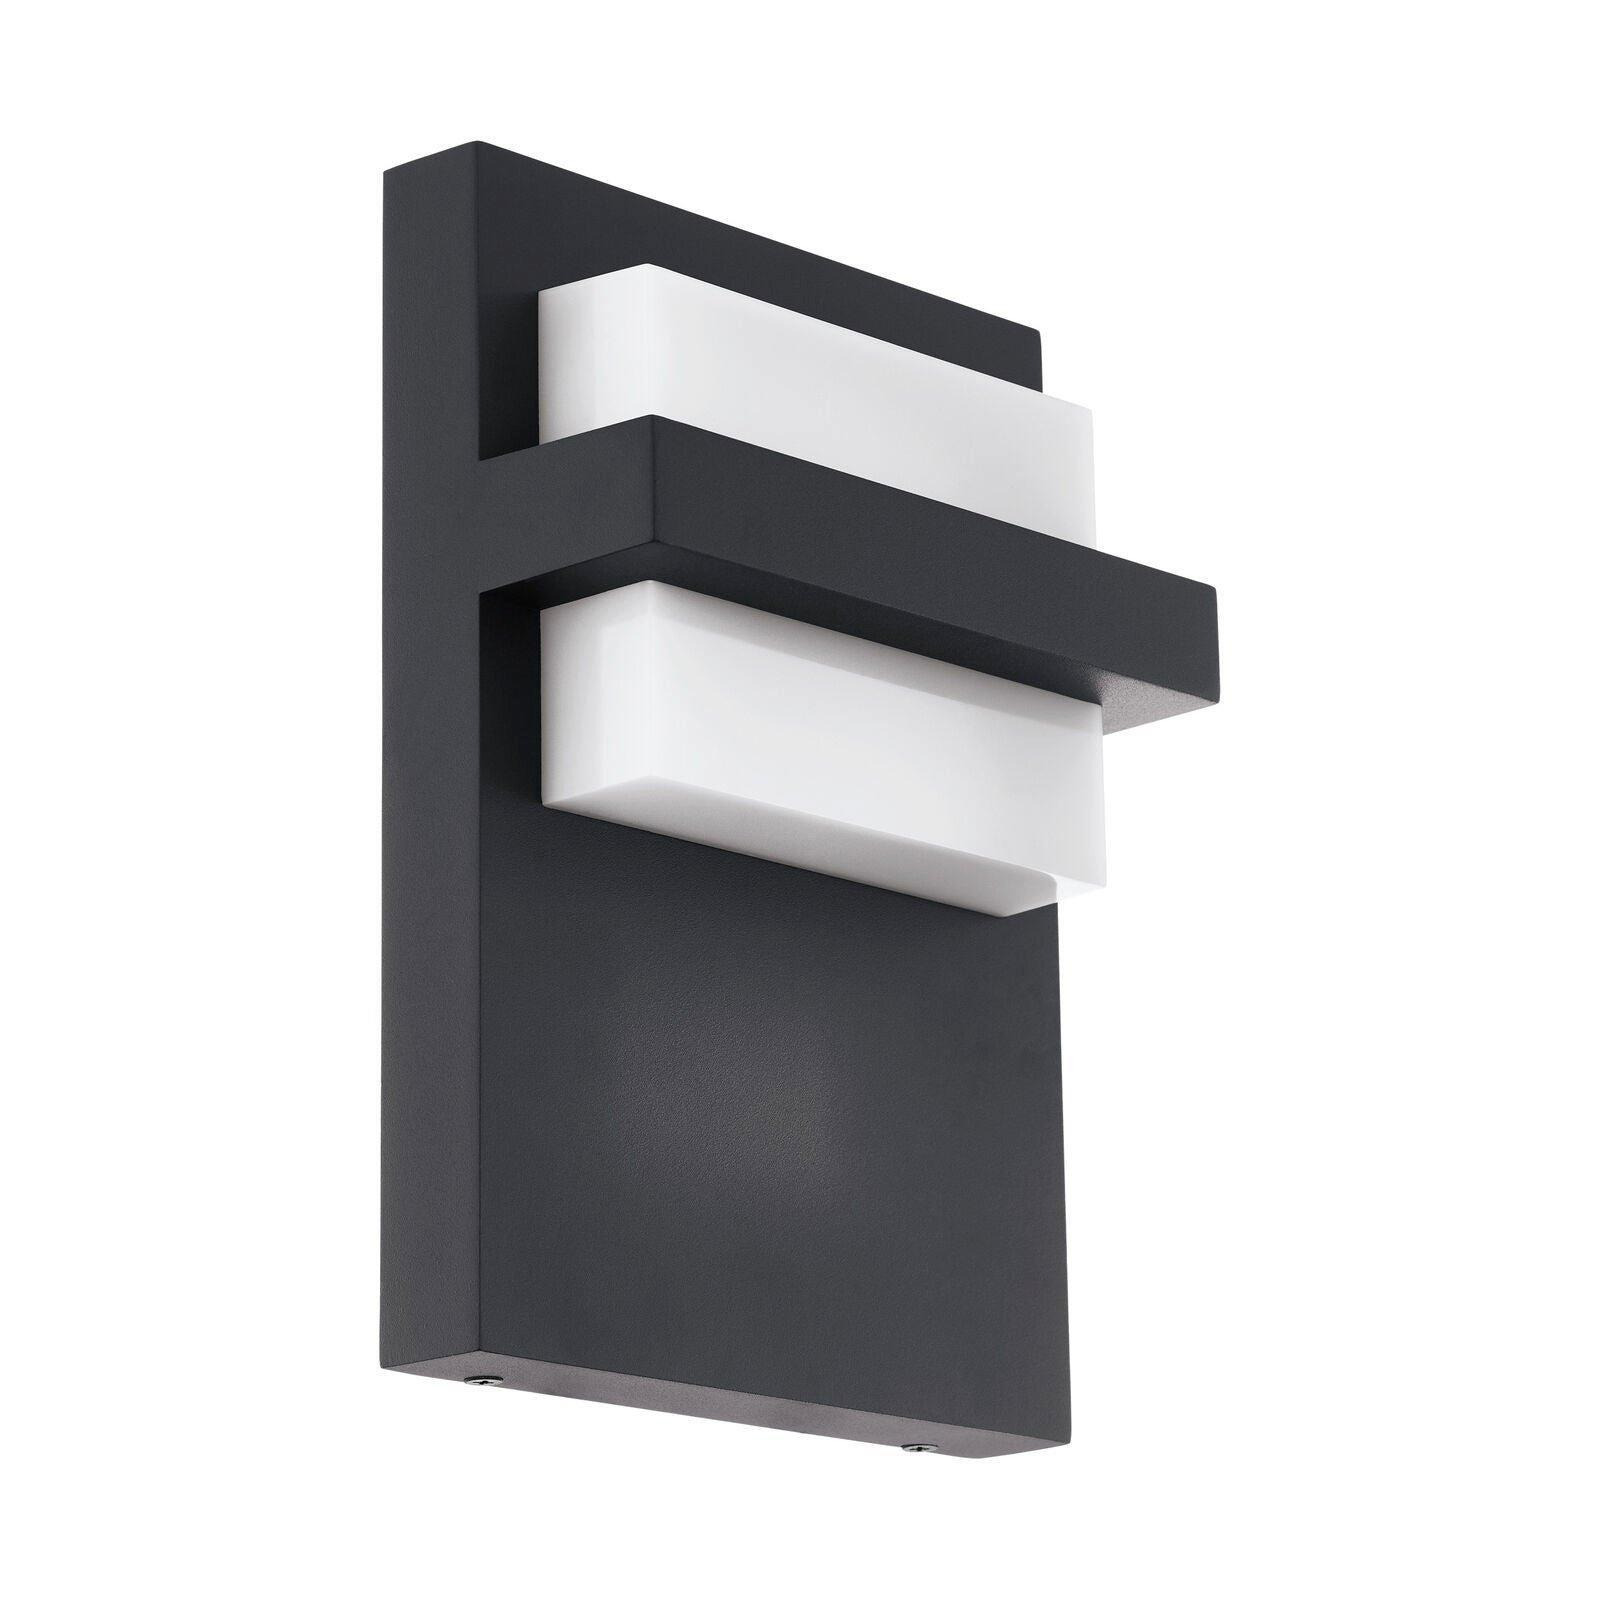 IP44 Outdoor Wall Light Anthracite Aluminium 10W Built in LED Porch Lamp - image 1